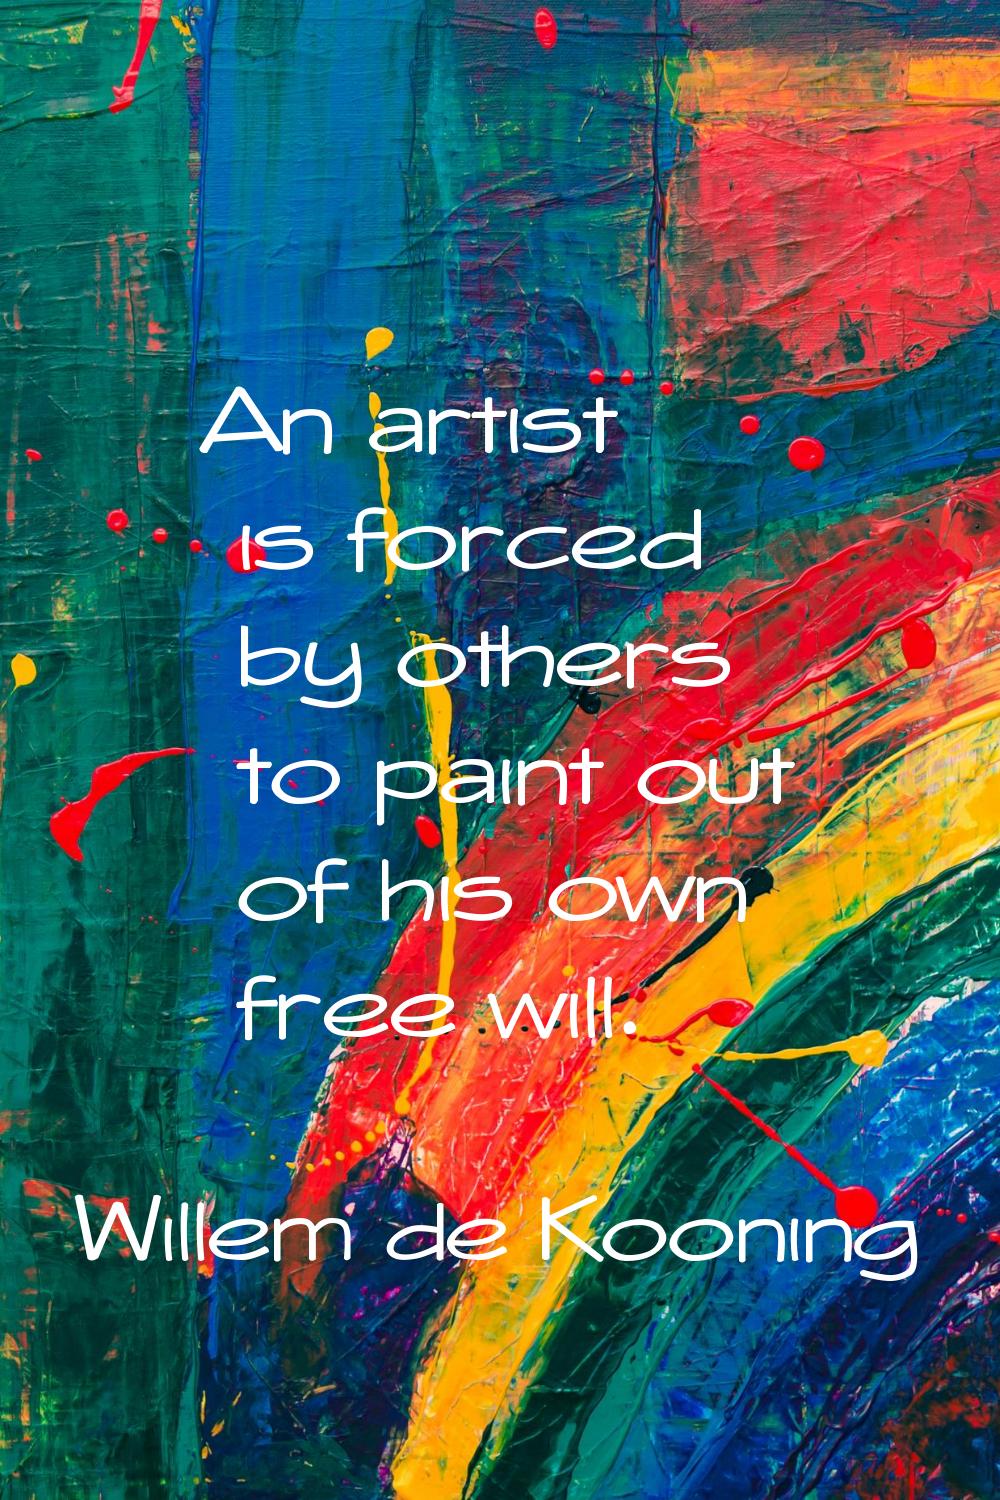 An artist is forced by others to paint out of his own free will.